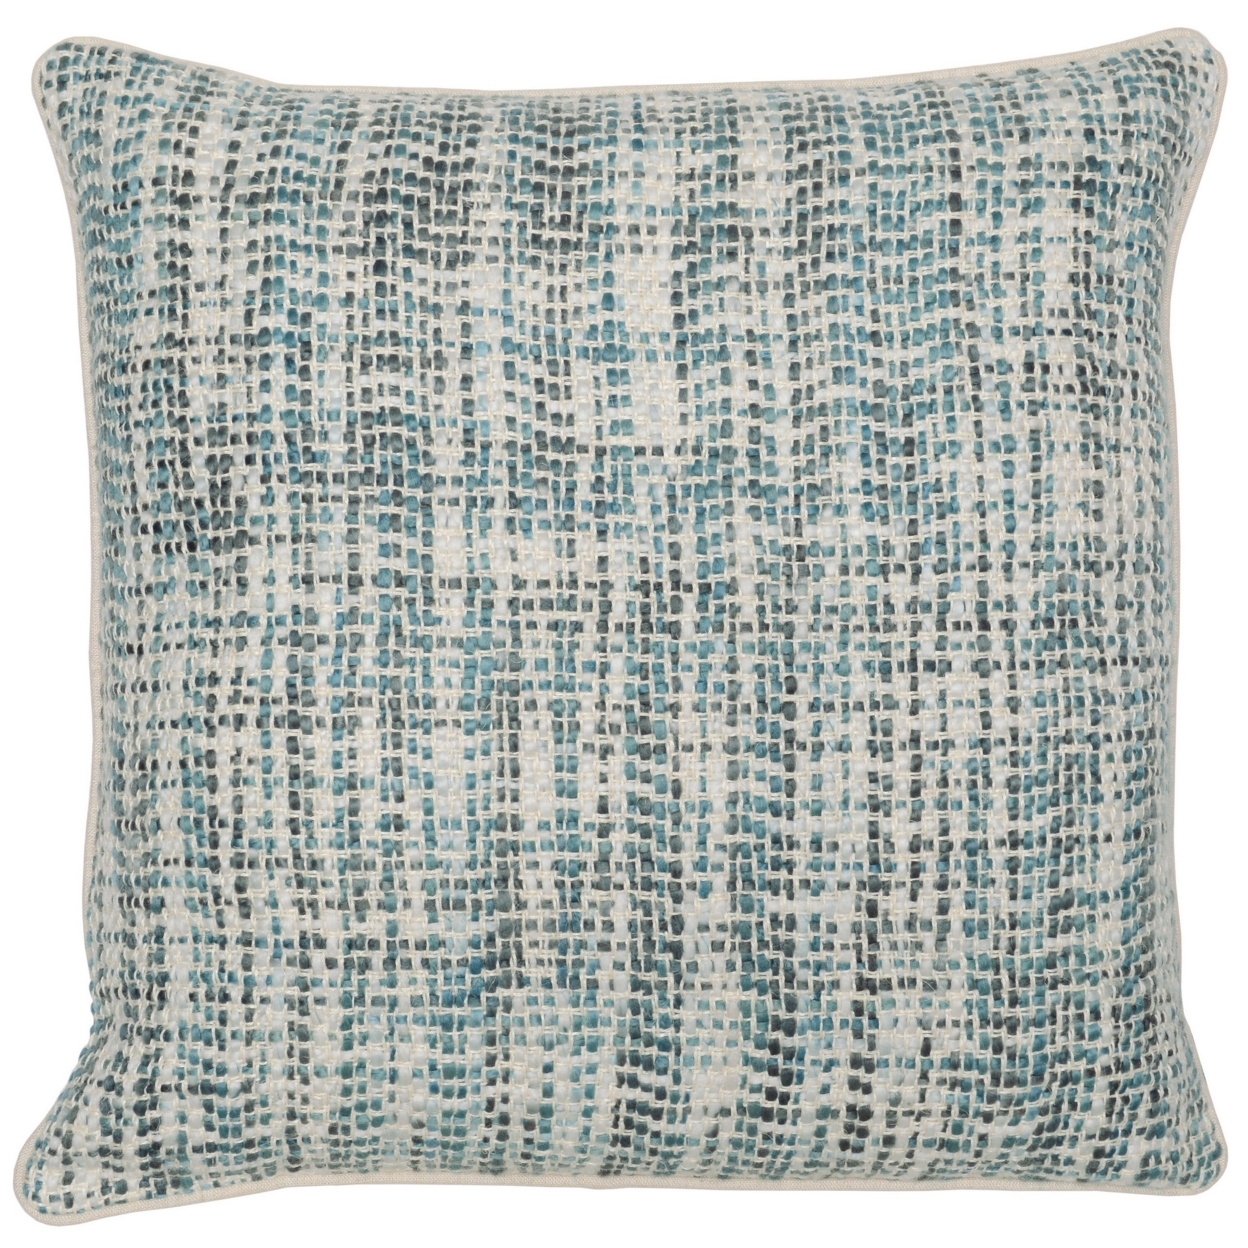 Square Fabric Throw Pillow With Hand Woven Pattern, White And Blue- Saltoro Sherpi